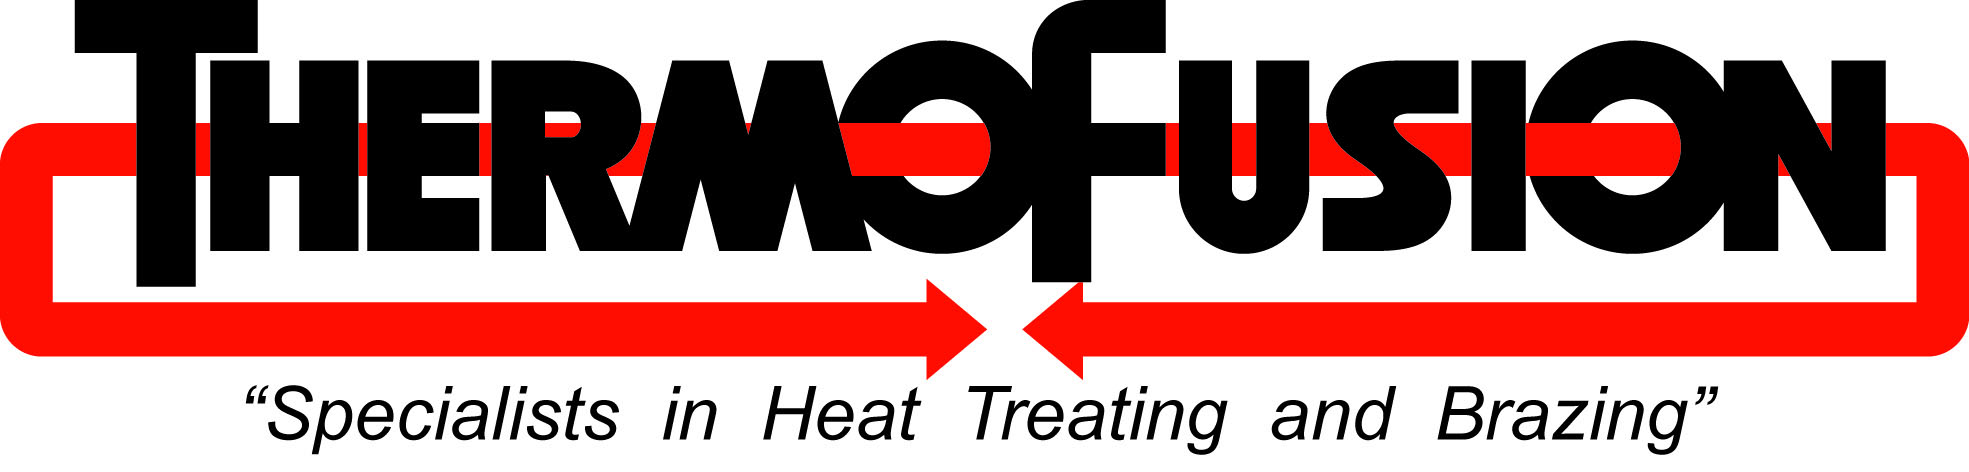 ThermoFusion Inc.